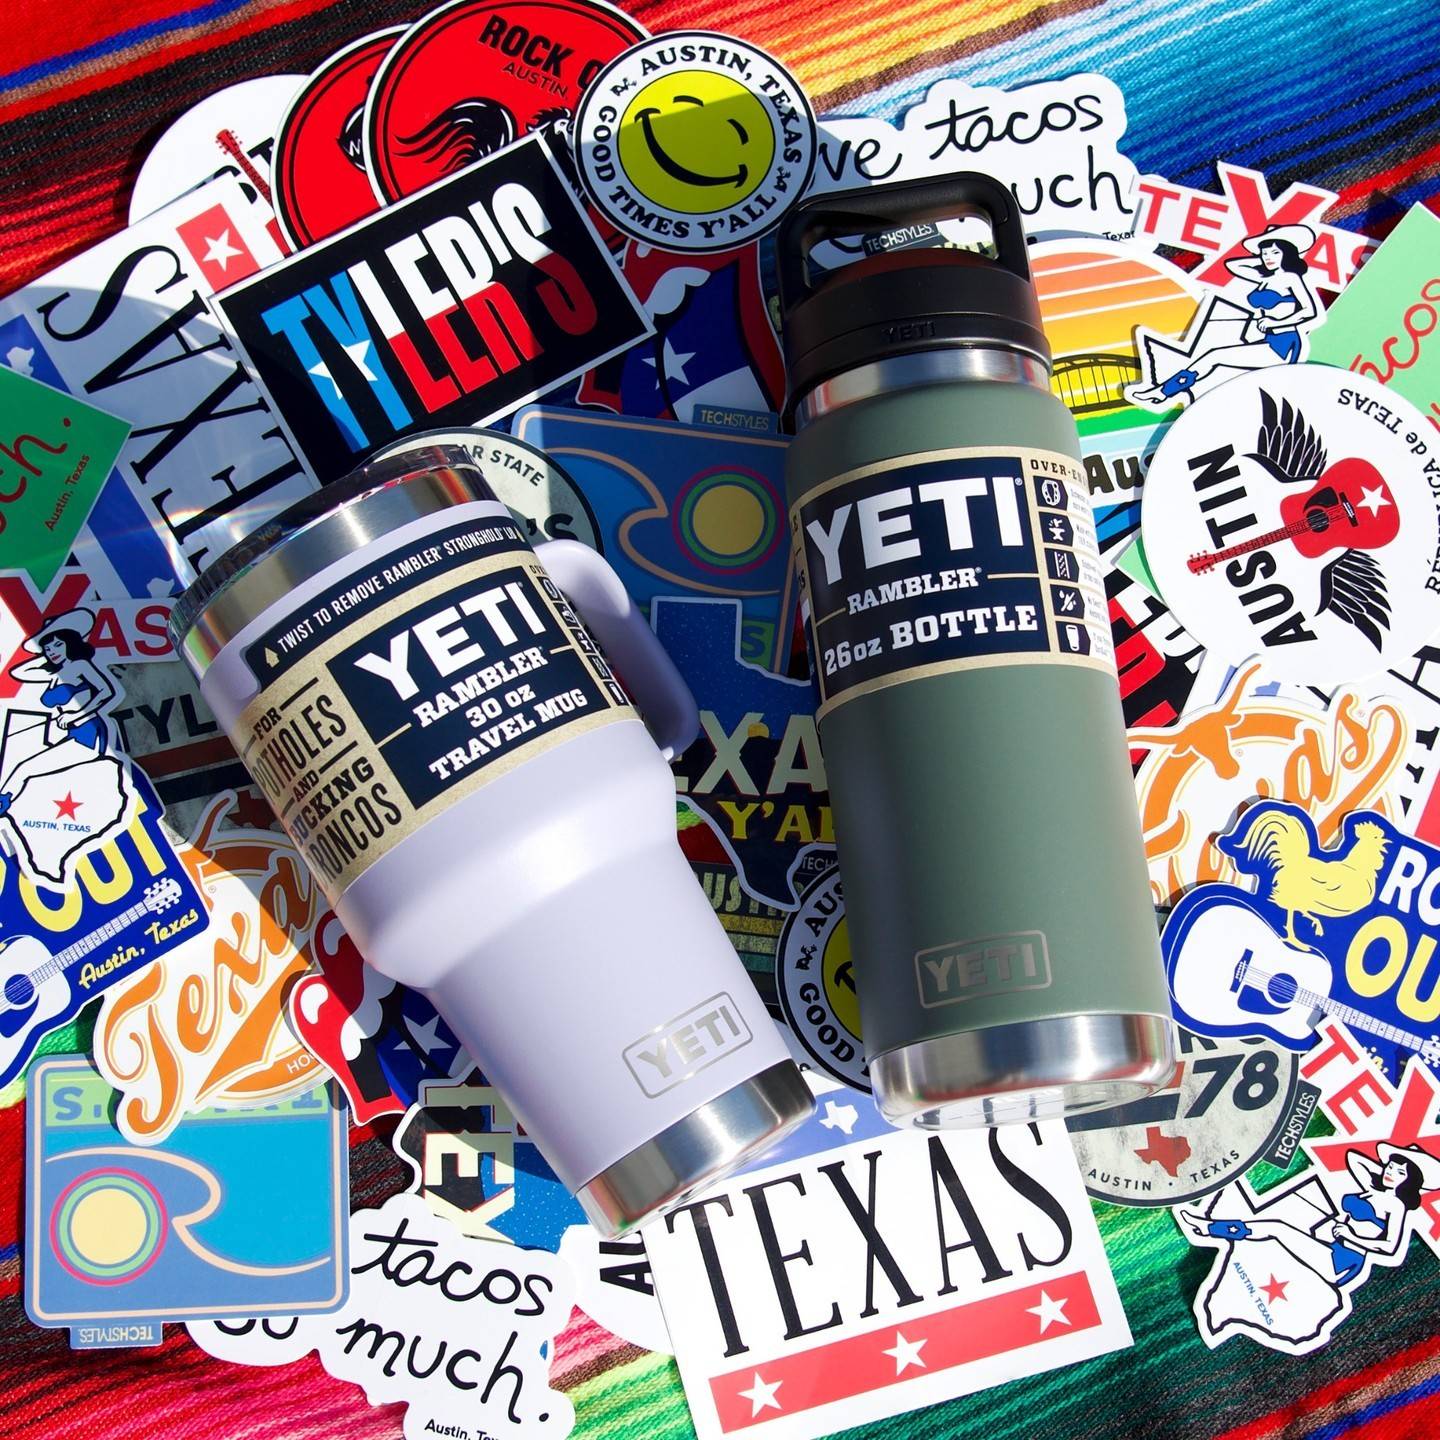 Case display of Yeti cups on top of Texas MM6 stickers